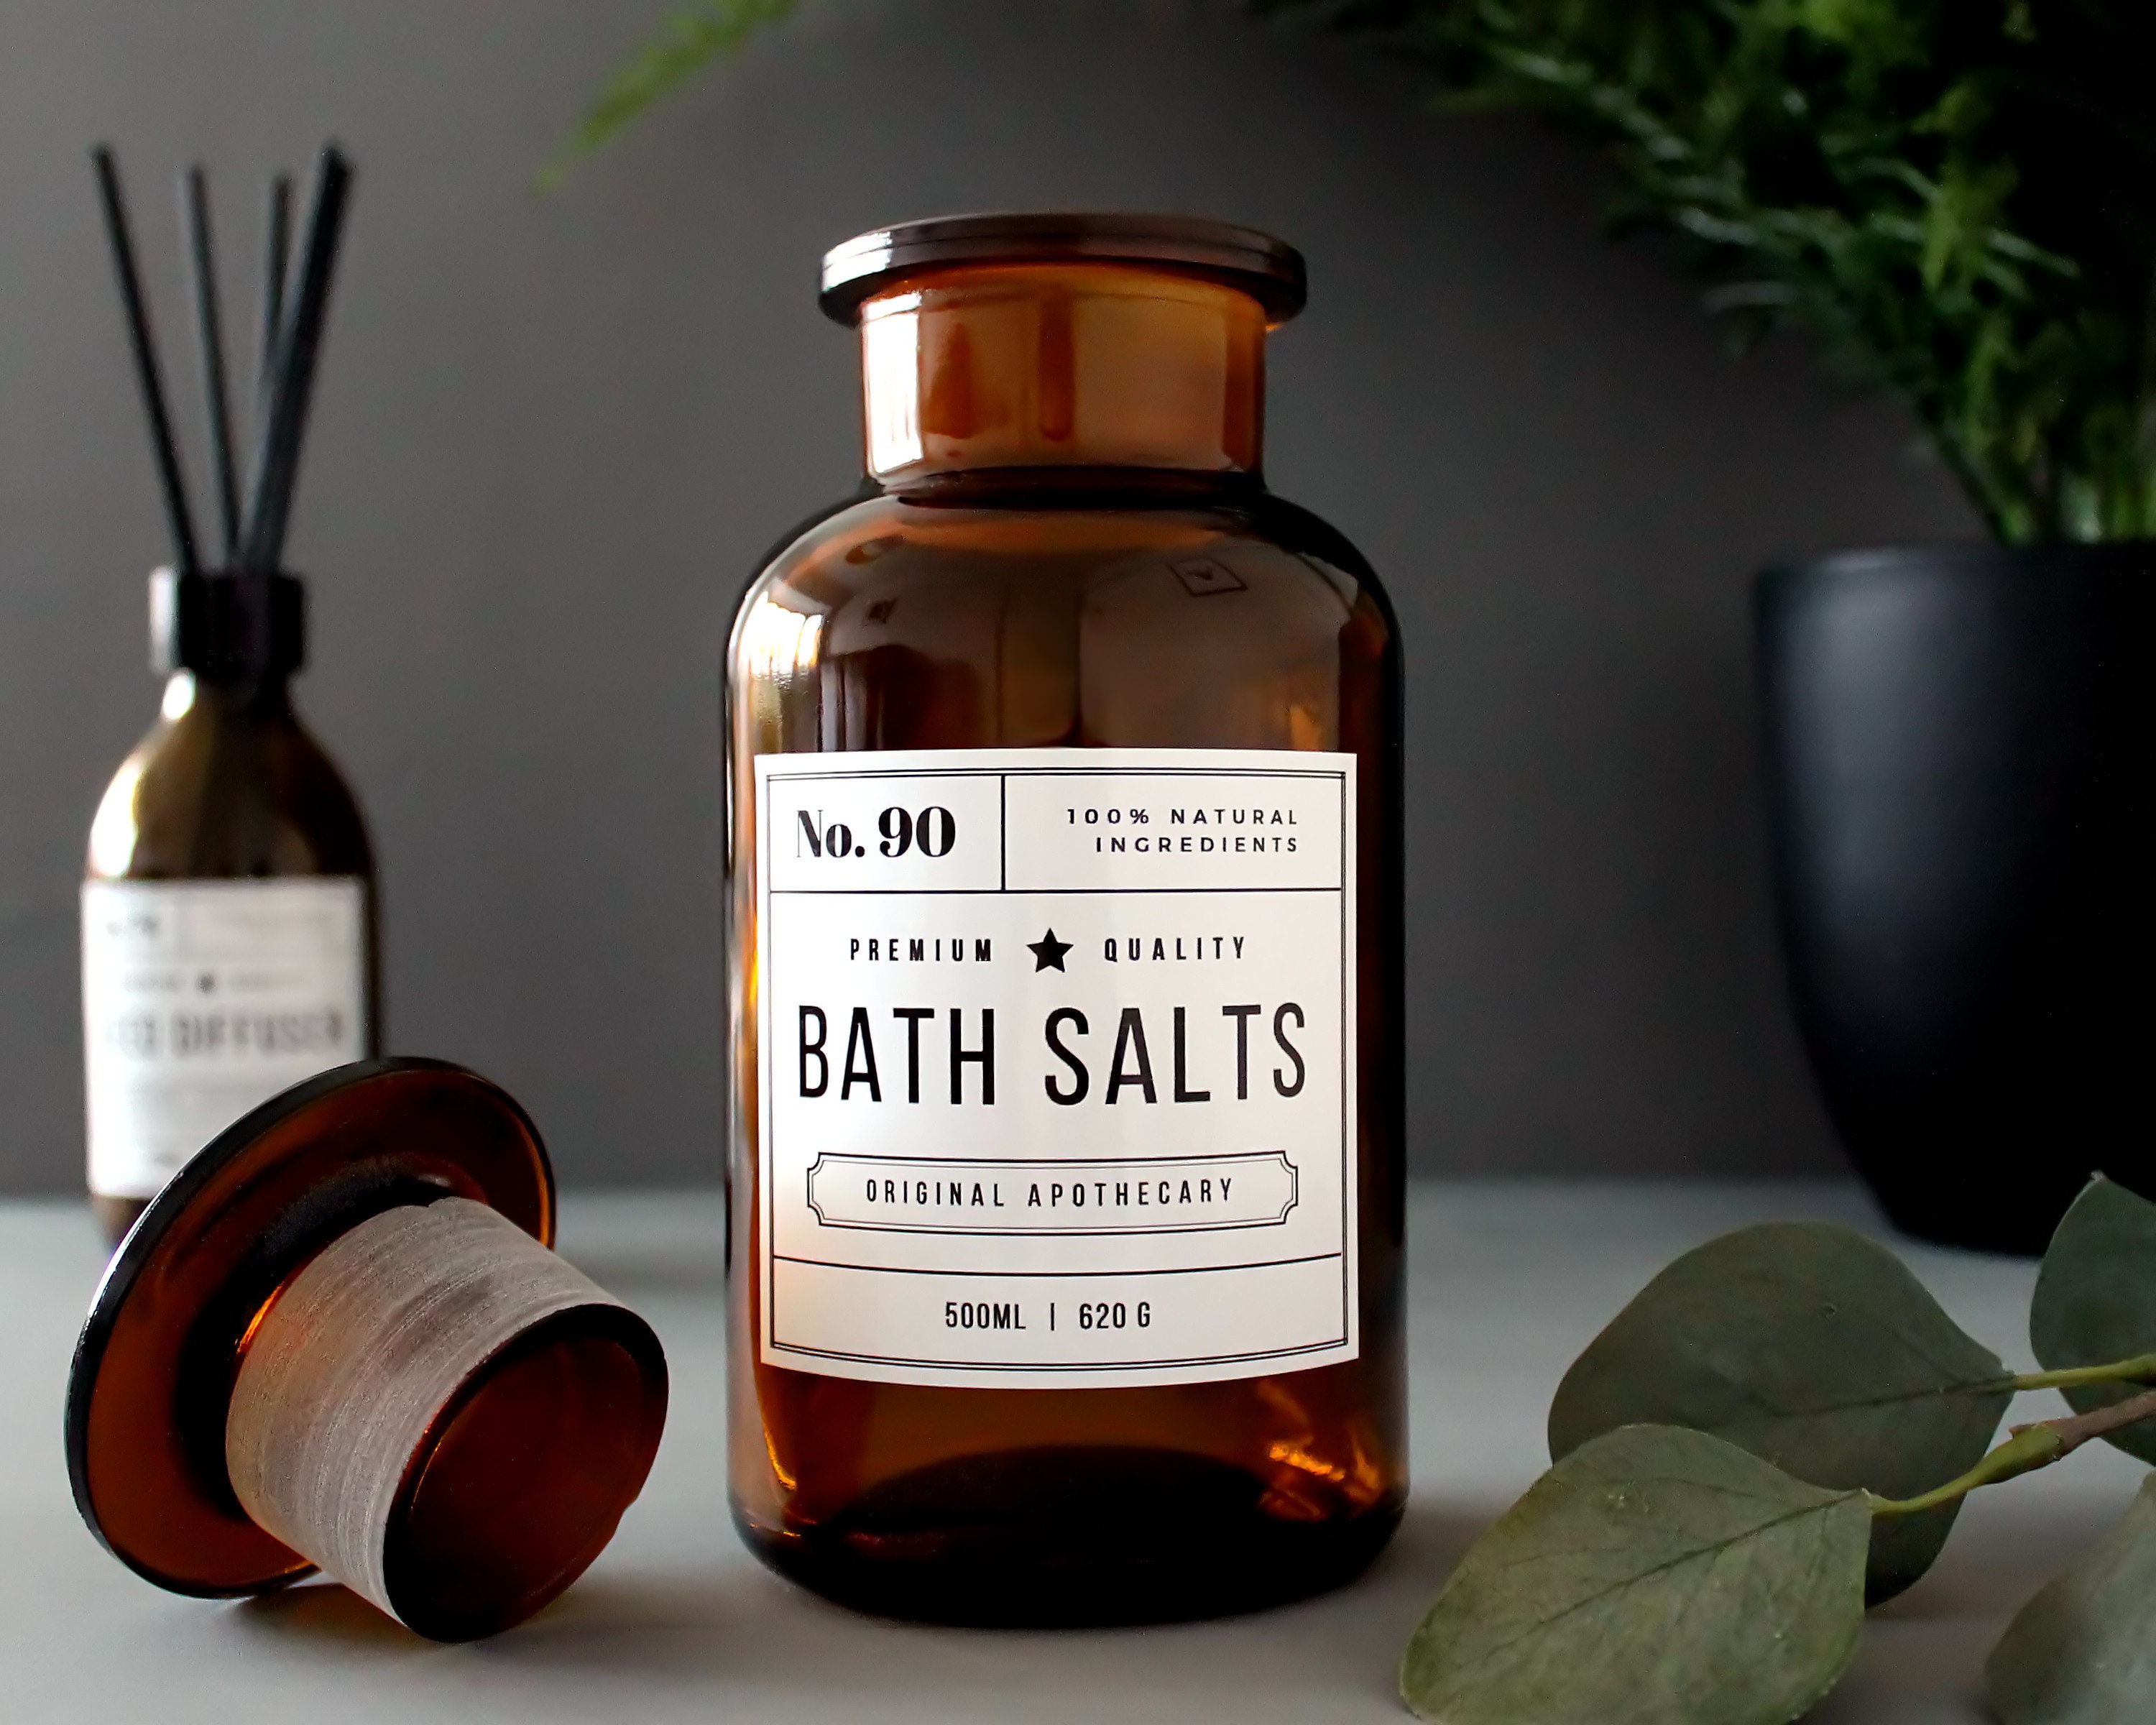 Urban Amber Glass Apothecary Bath Salts Jar 500ml 16oz with Copper Industrial New York Rose Gold Vintage Style Label